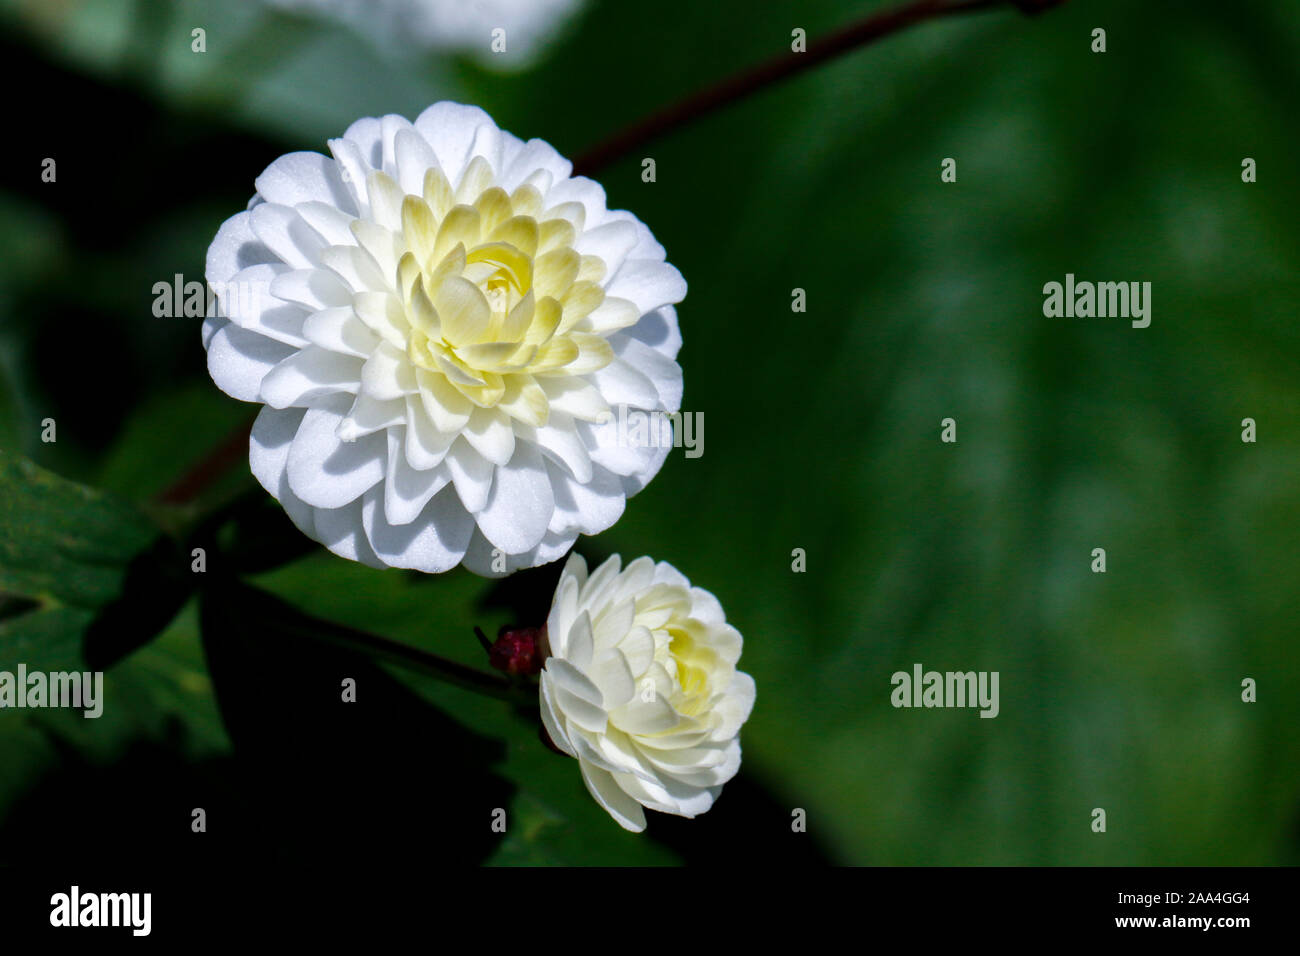 Close up of white flowers of Ranunculus aconitifolius (Batchelor's buttons) Stock Photo